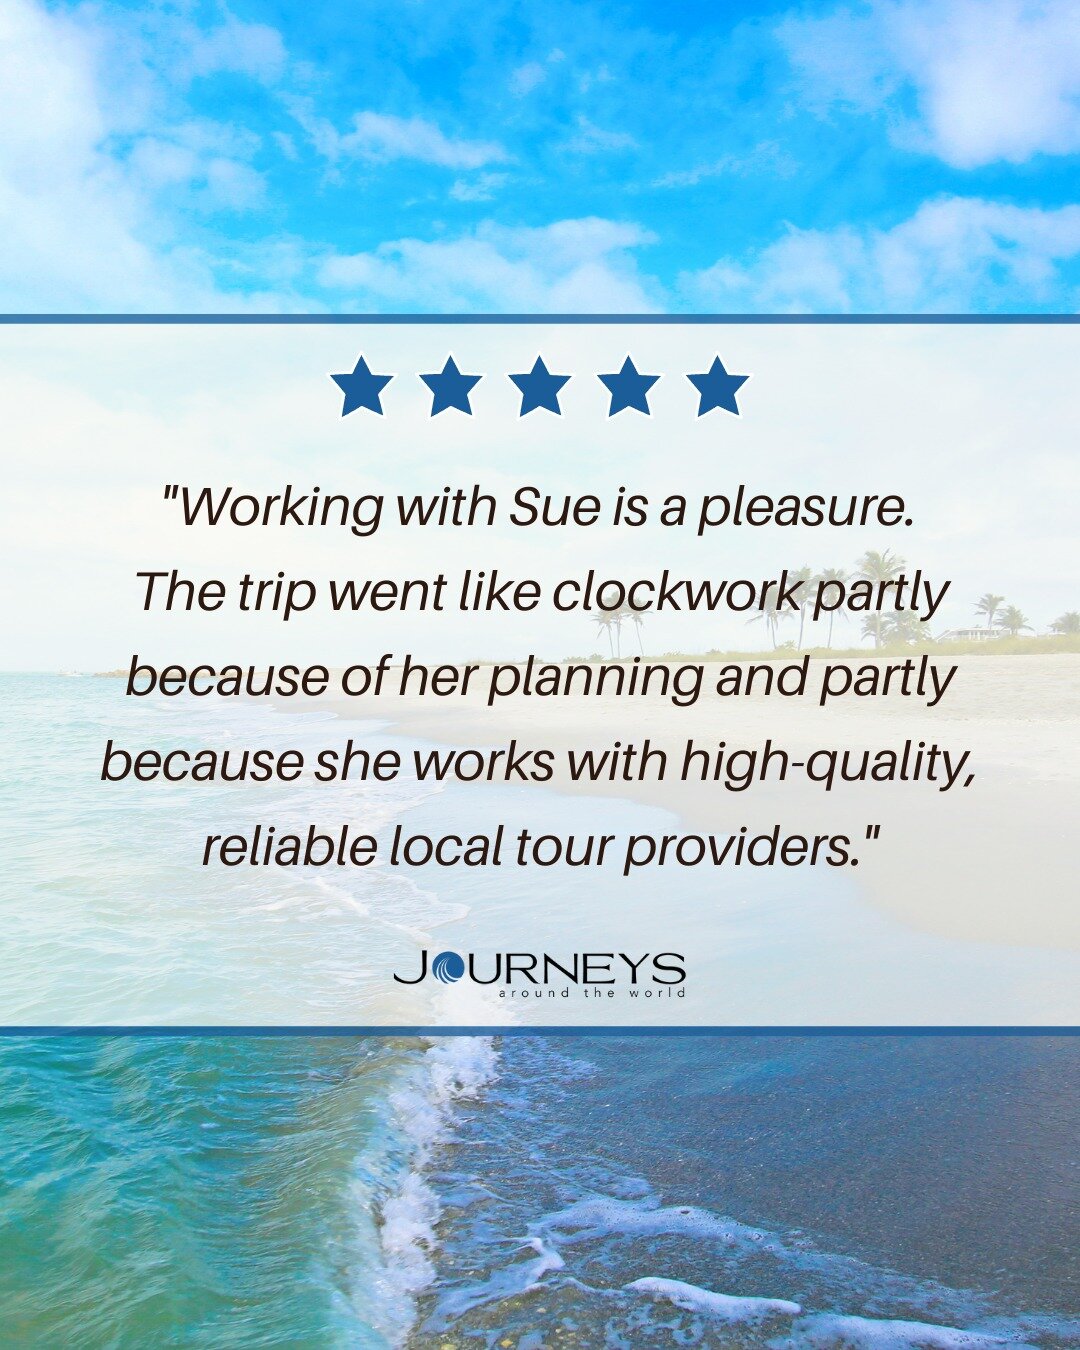 Why choose Susan at Journeys Around The World as your travel advisor? Imagine accessing a world of VIP experiences you simply can't create on your own! With my Virtuoso Travel Advisor status, I bring you exclusive benefits through my preferred partne